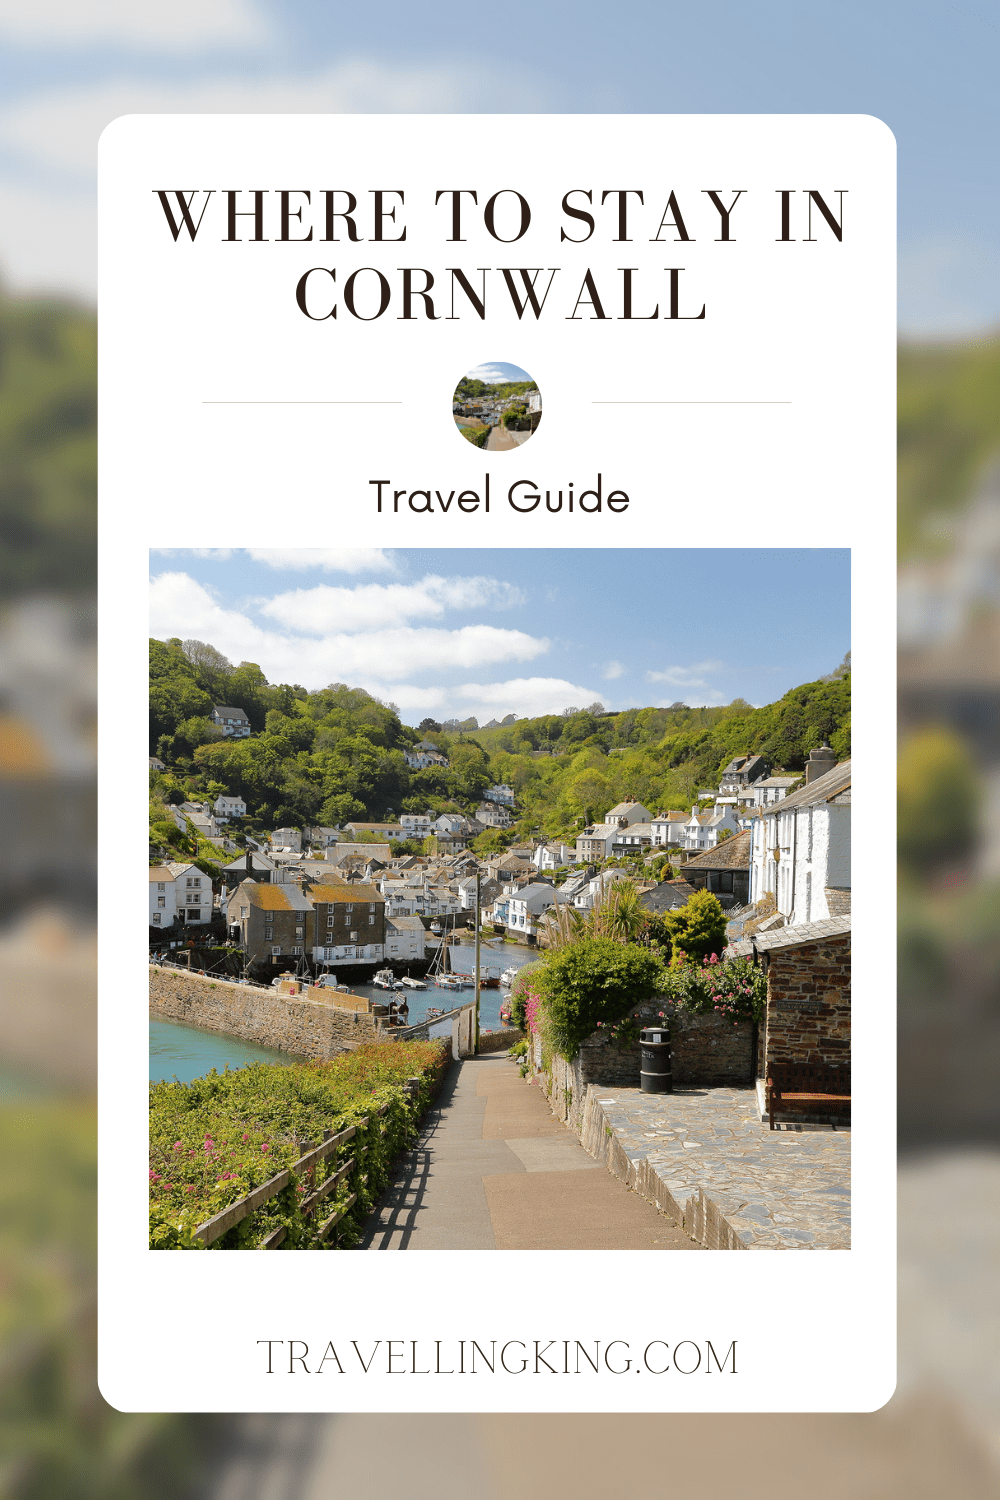 Where to stay in Cornwall